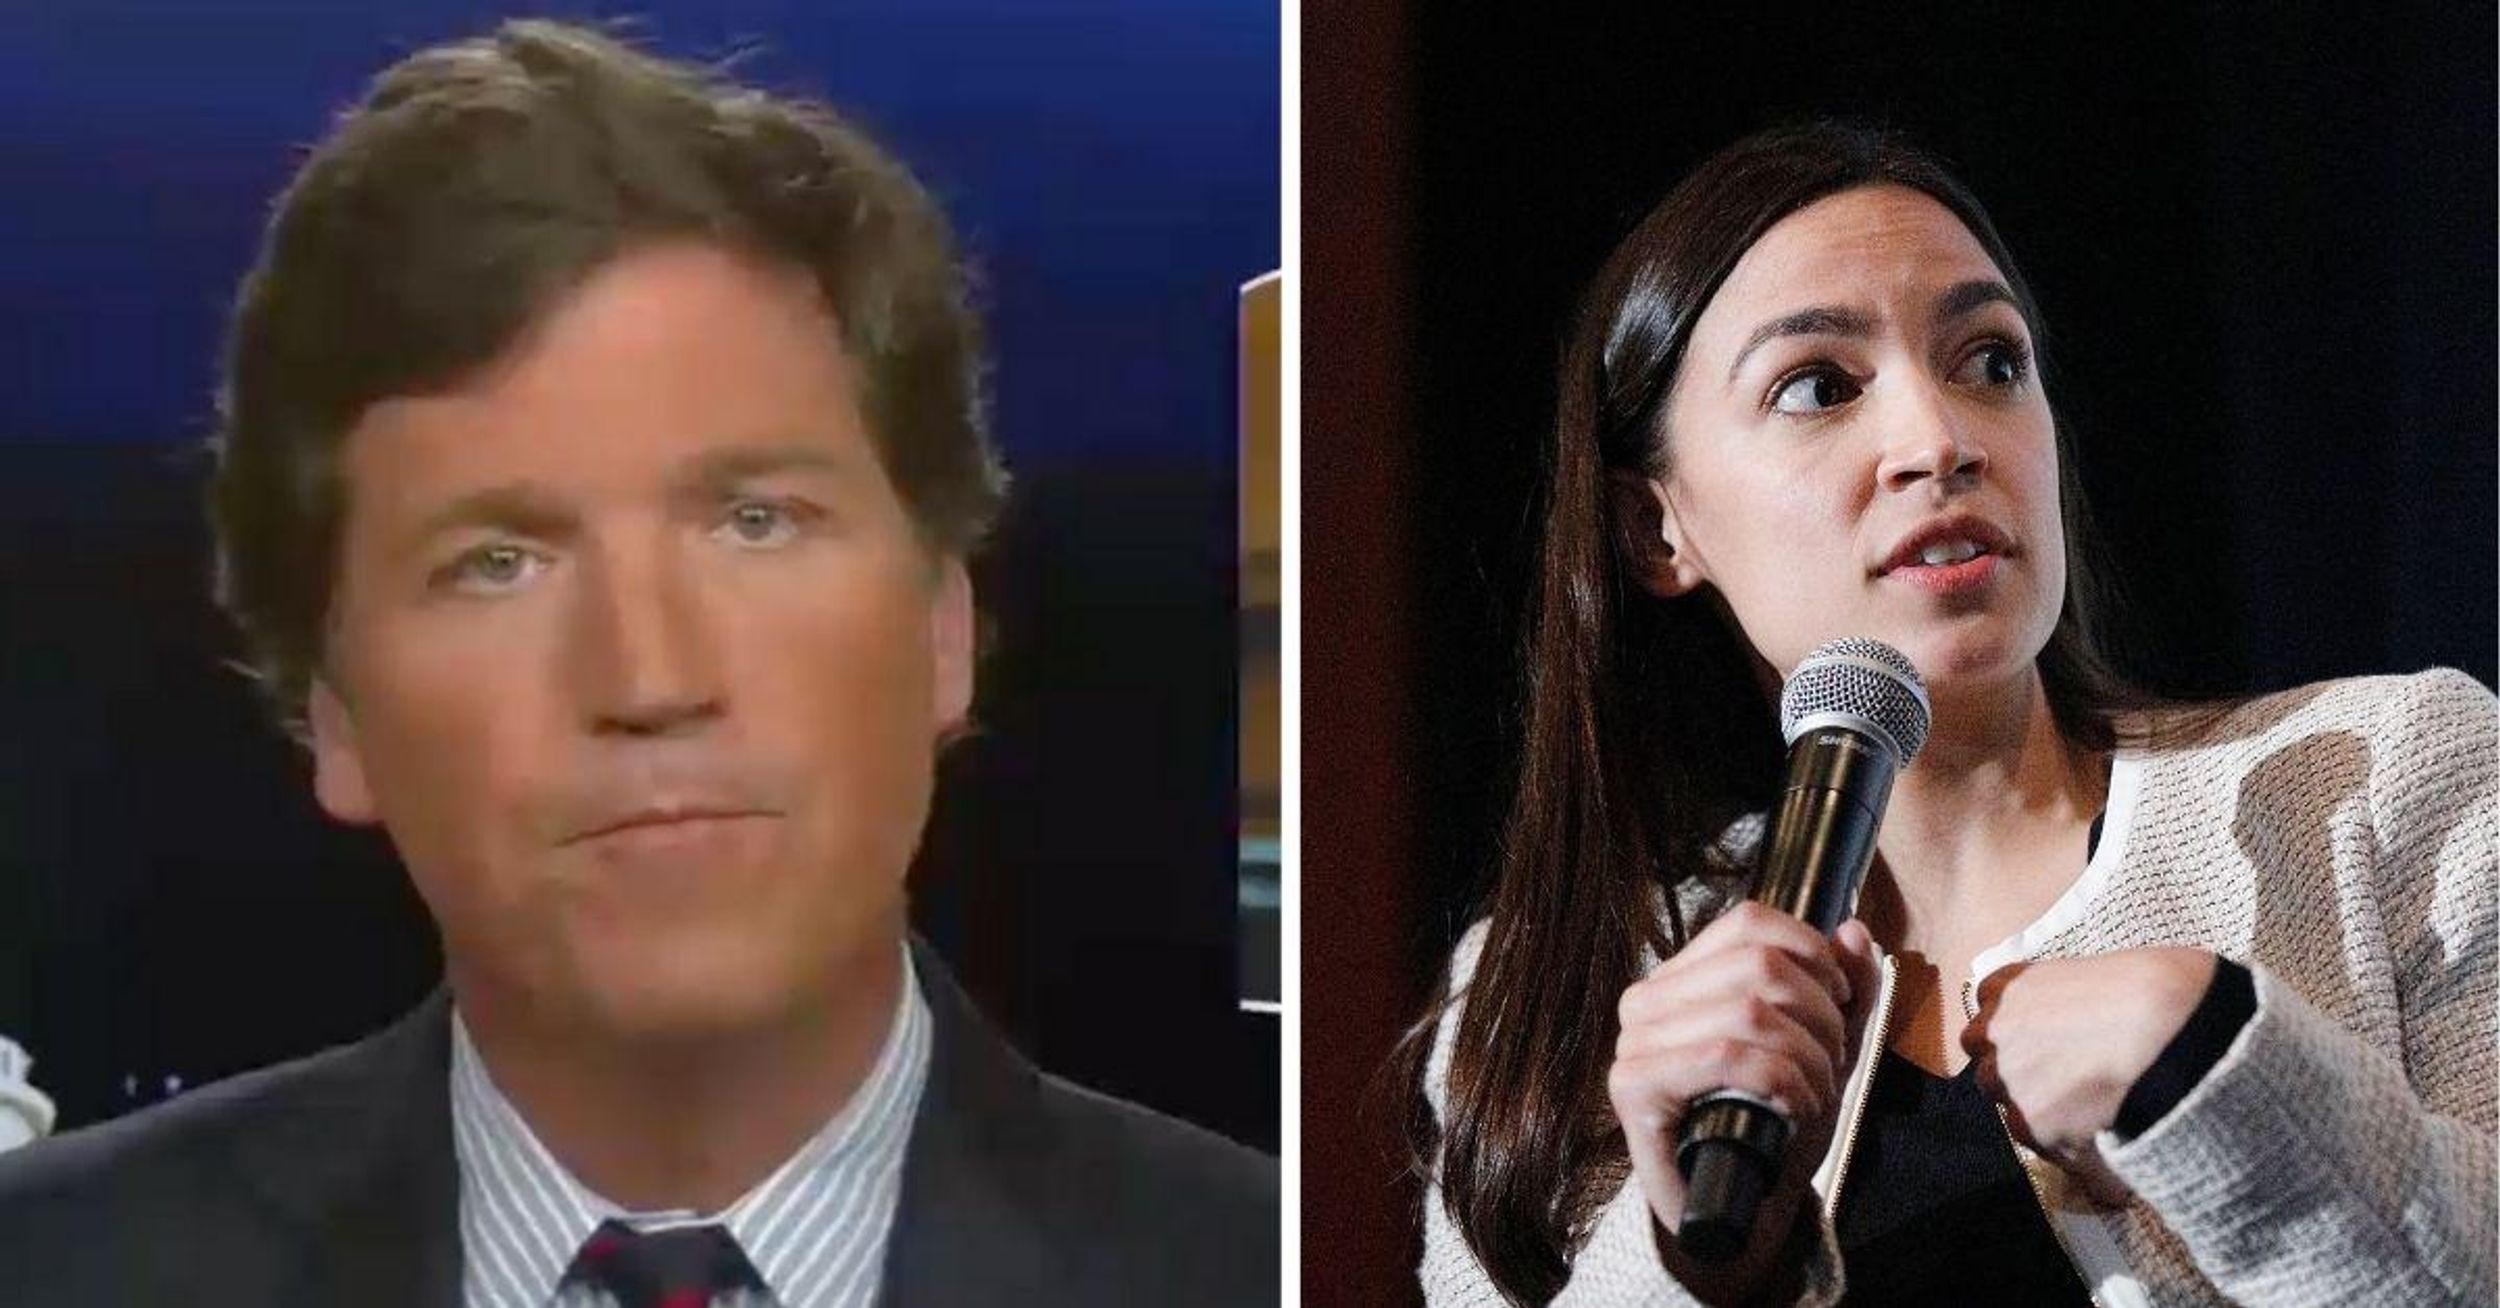 Tucker Carlson Blasted For Hypocrisy After Mocking AOC For Fearing For Her Life During Capitol Riot